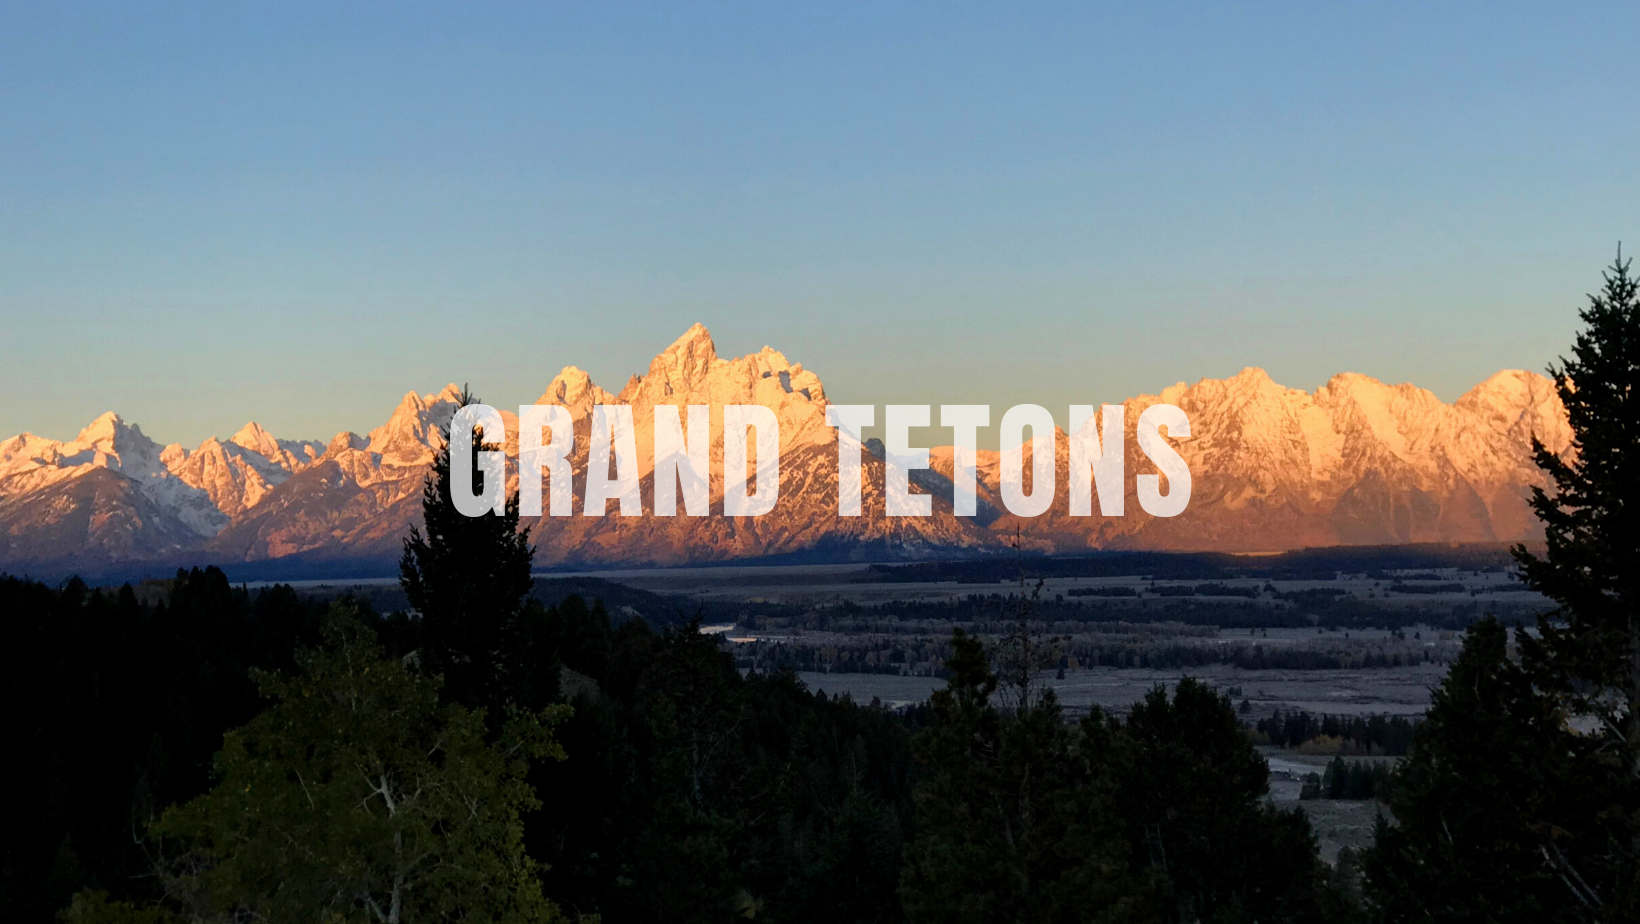 No one Expected to Find this in Grand Tetons National Park